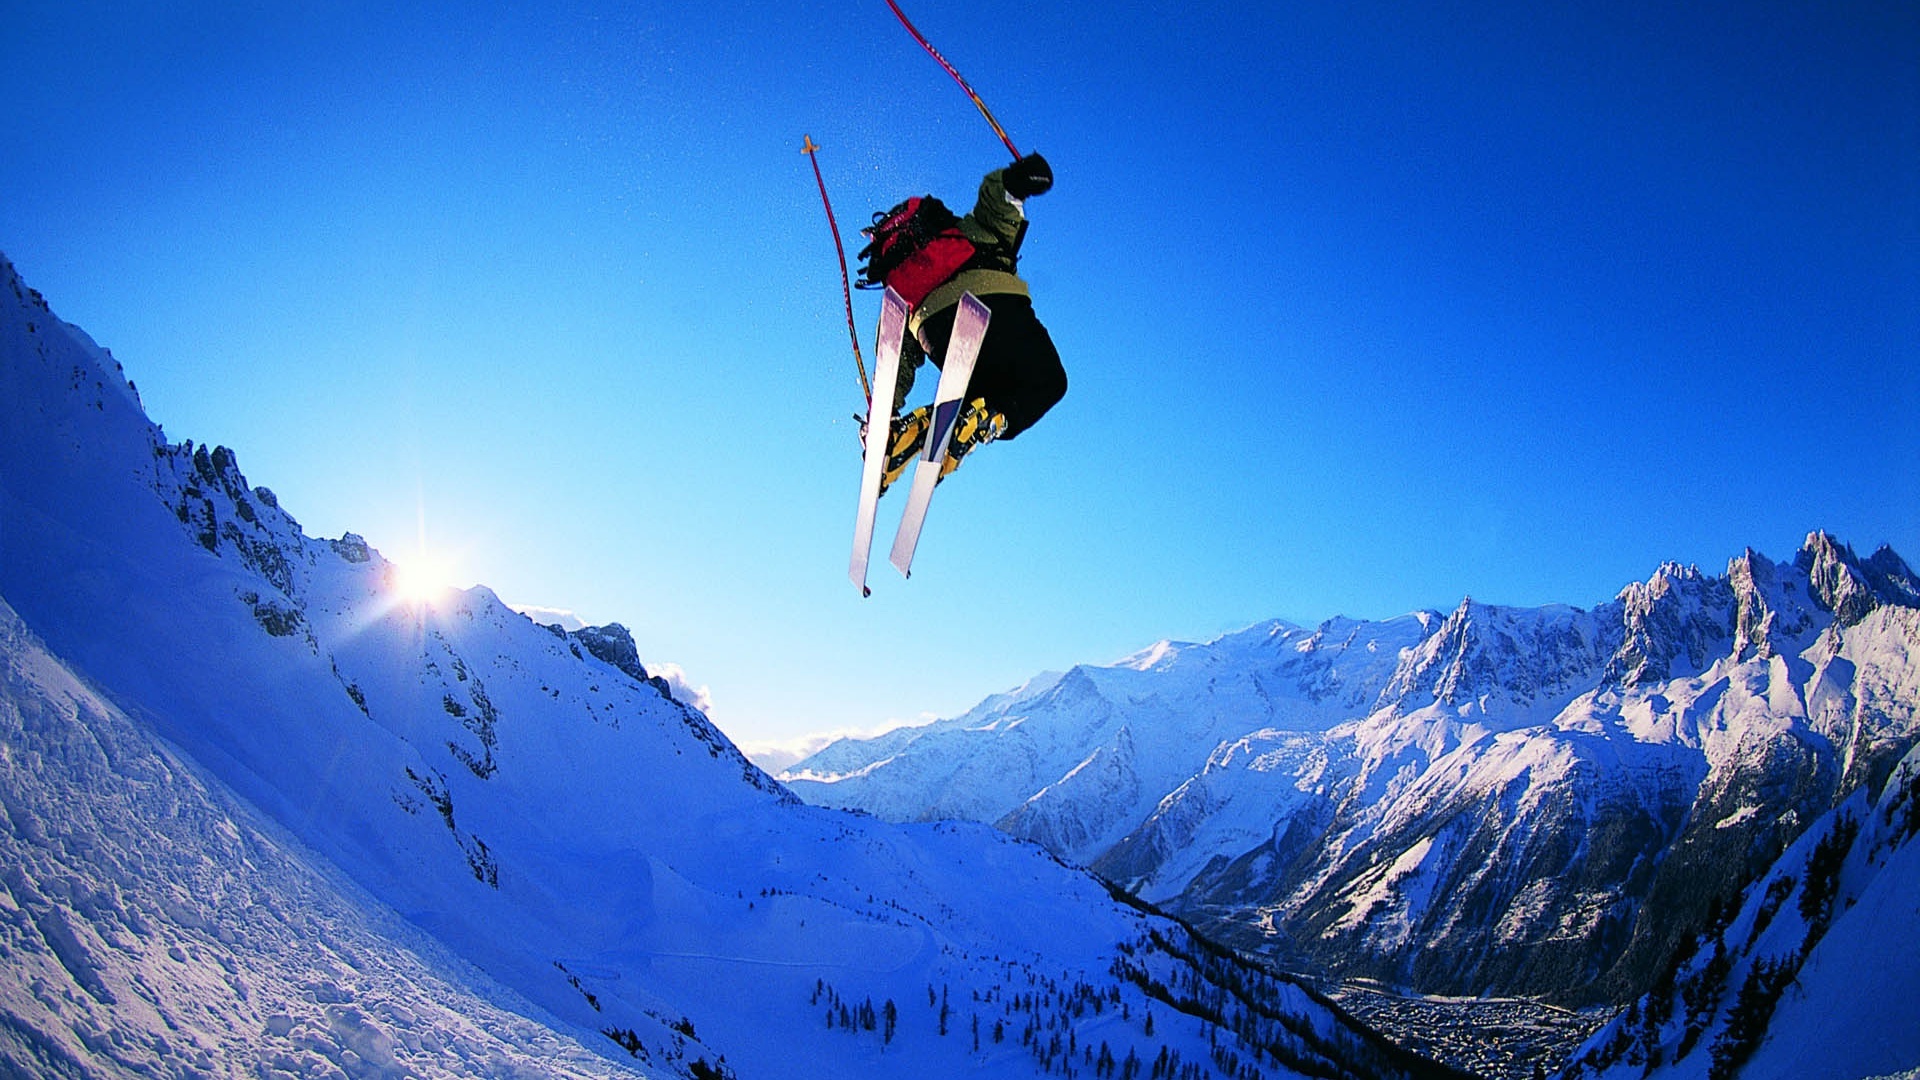 Jumping: Extreme winter sport, Downhill, Cross-country distance, Freestyle, Ski jumping. 1920x1080 Full HD Wallpaper.